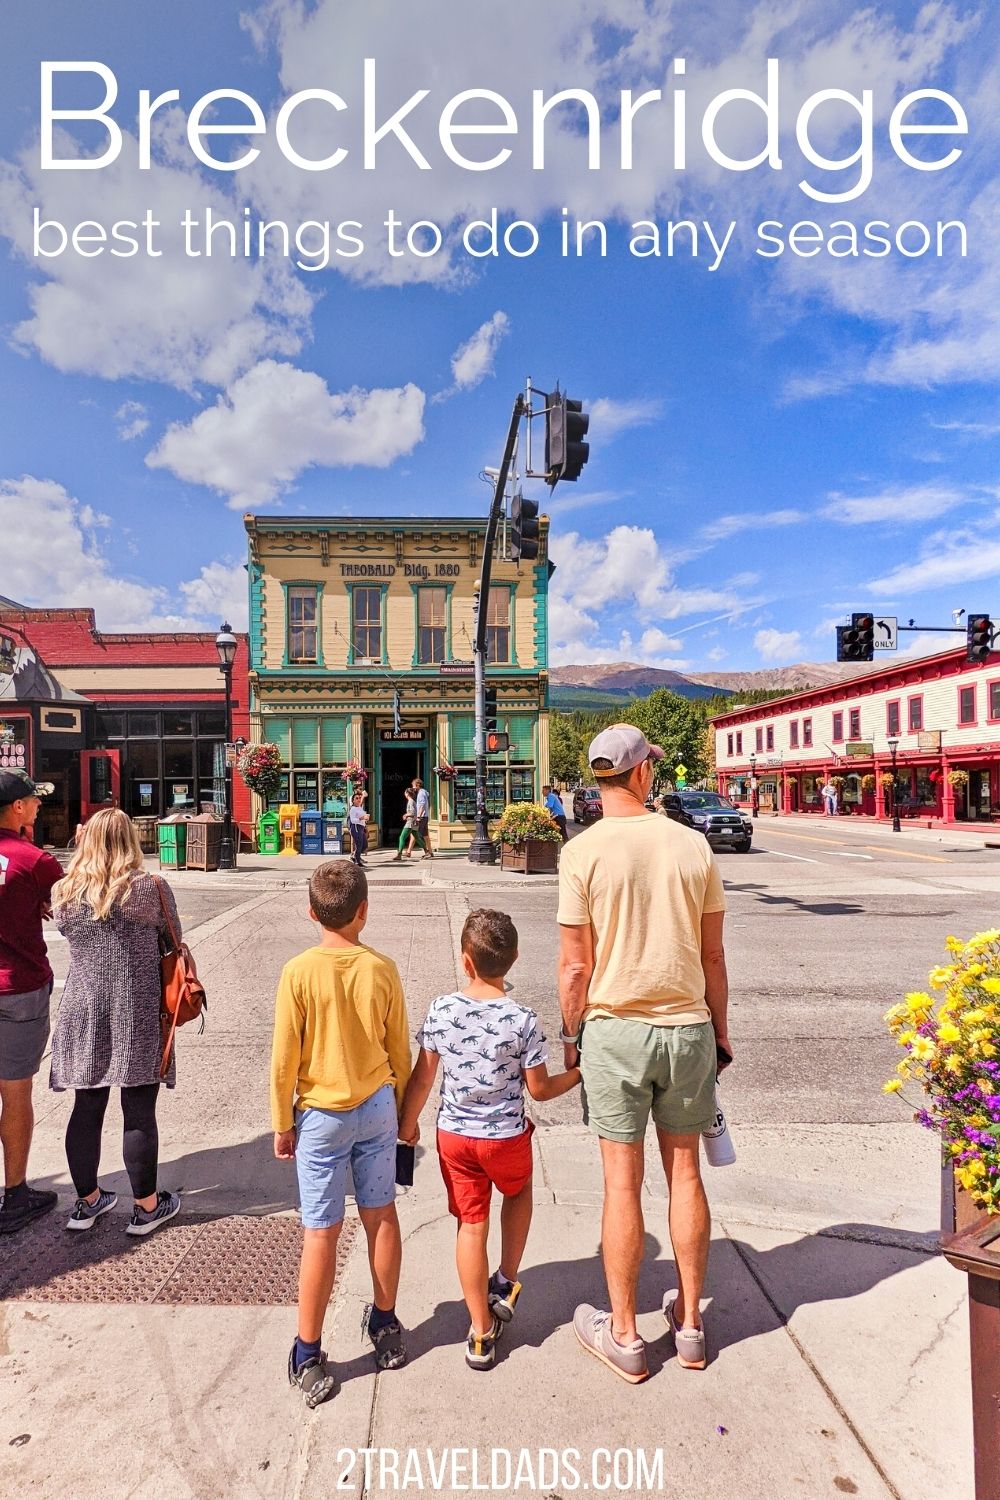 There are things to do in Breckenridge all year, not just during ski season. From epic hiking to a beautiful historic downtown, mine country to horseback riding, there are so many things to do for any season or type of traveler.